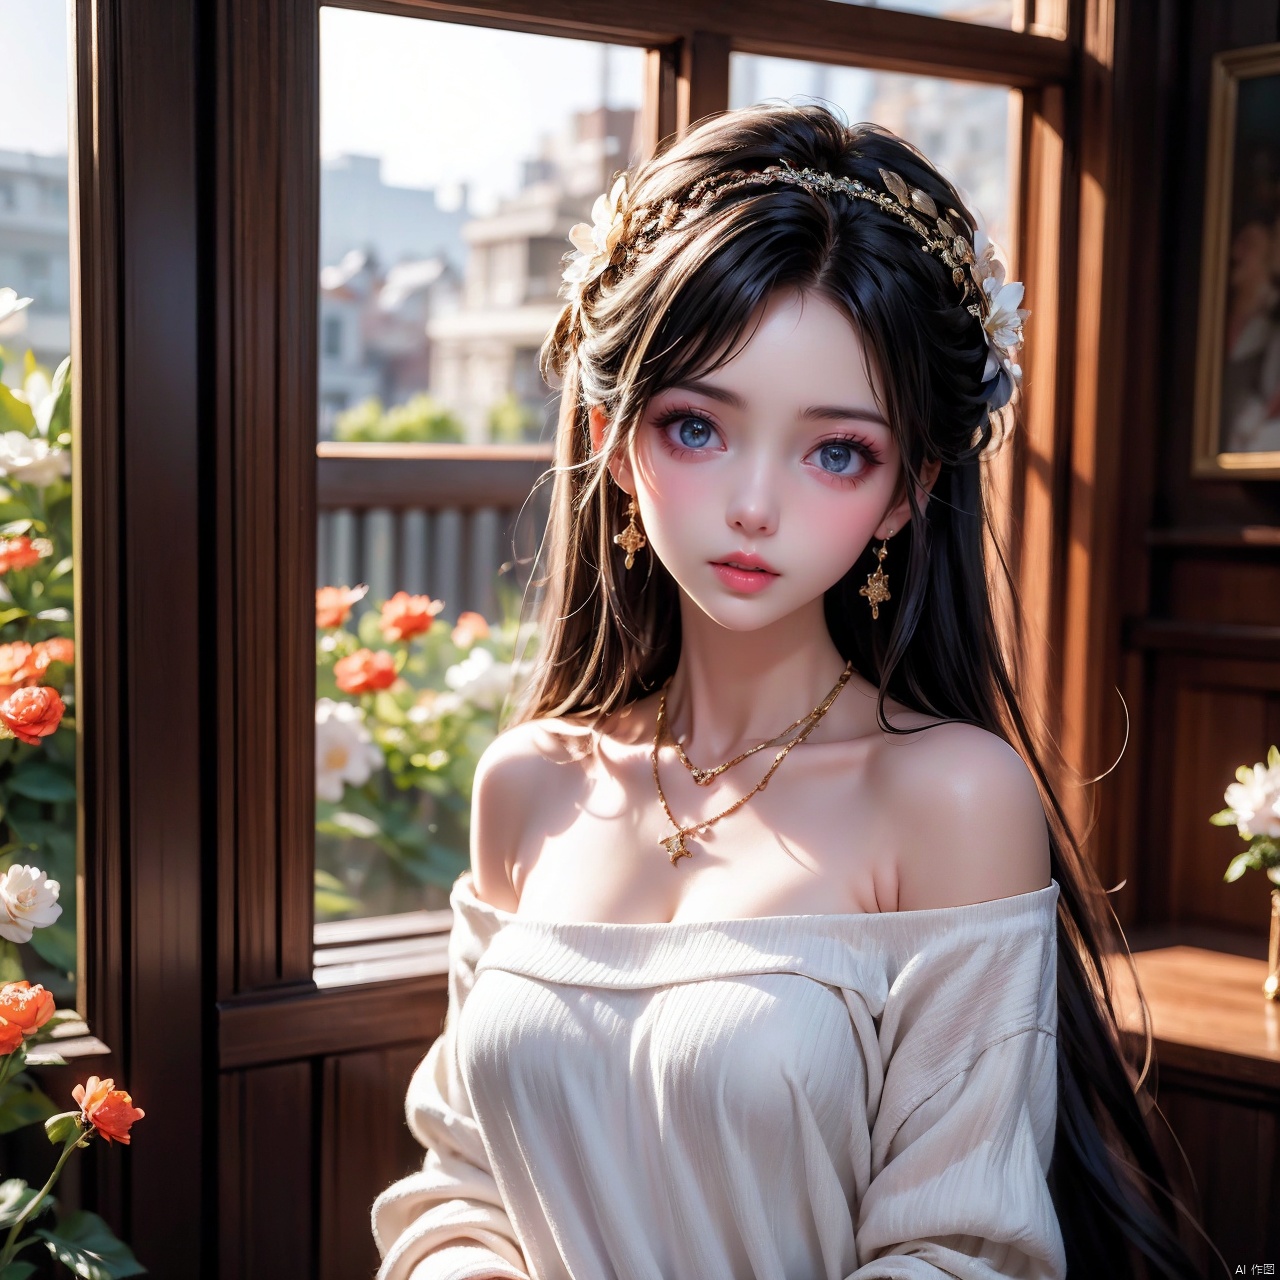  {{masterpiece}}, {best quality}}, {superfine}, {{extremely thin}, 4K, {8K}, best quality, {beauty}, a girl, solo, taking a selfie against the window, light orange and light gold style, white knitwear, advanced magazine, noble and elegant, elegant temperament, lifelike, aesthetic, floral, romantic femininity, long hair, black hair, necklace, bare shoulders, flowers, hair accessories, upper body, shoulder off, powder blusher, makeup Lips, collarbone, long sleeves, Tyndale effect, 8K, large aperture, century masterpiece

